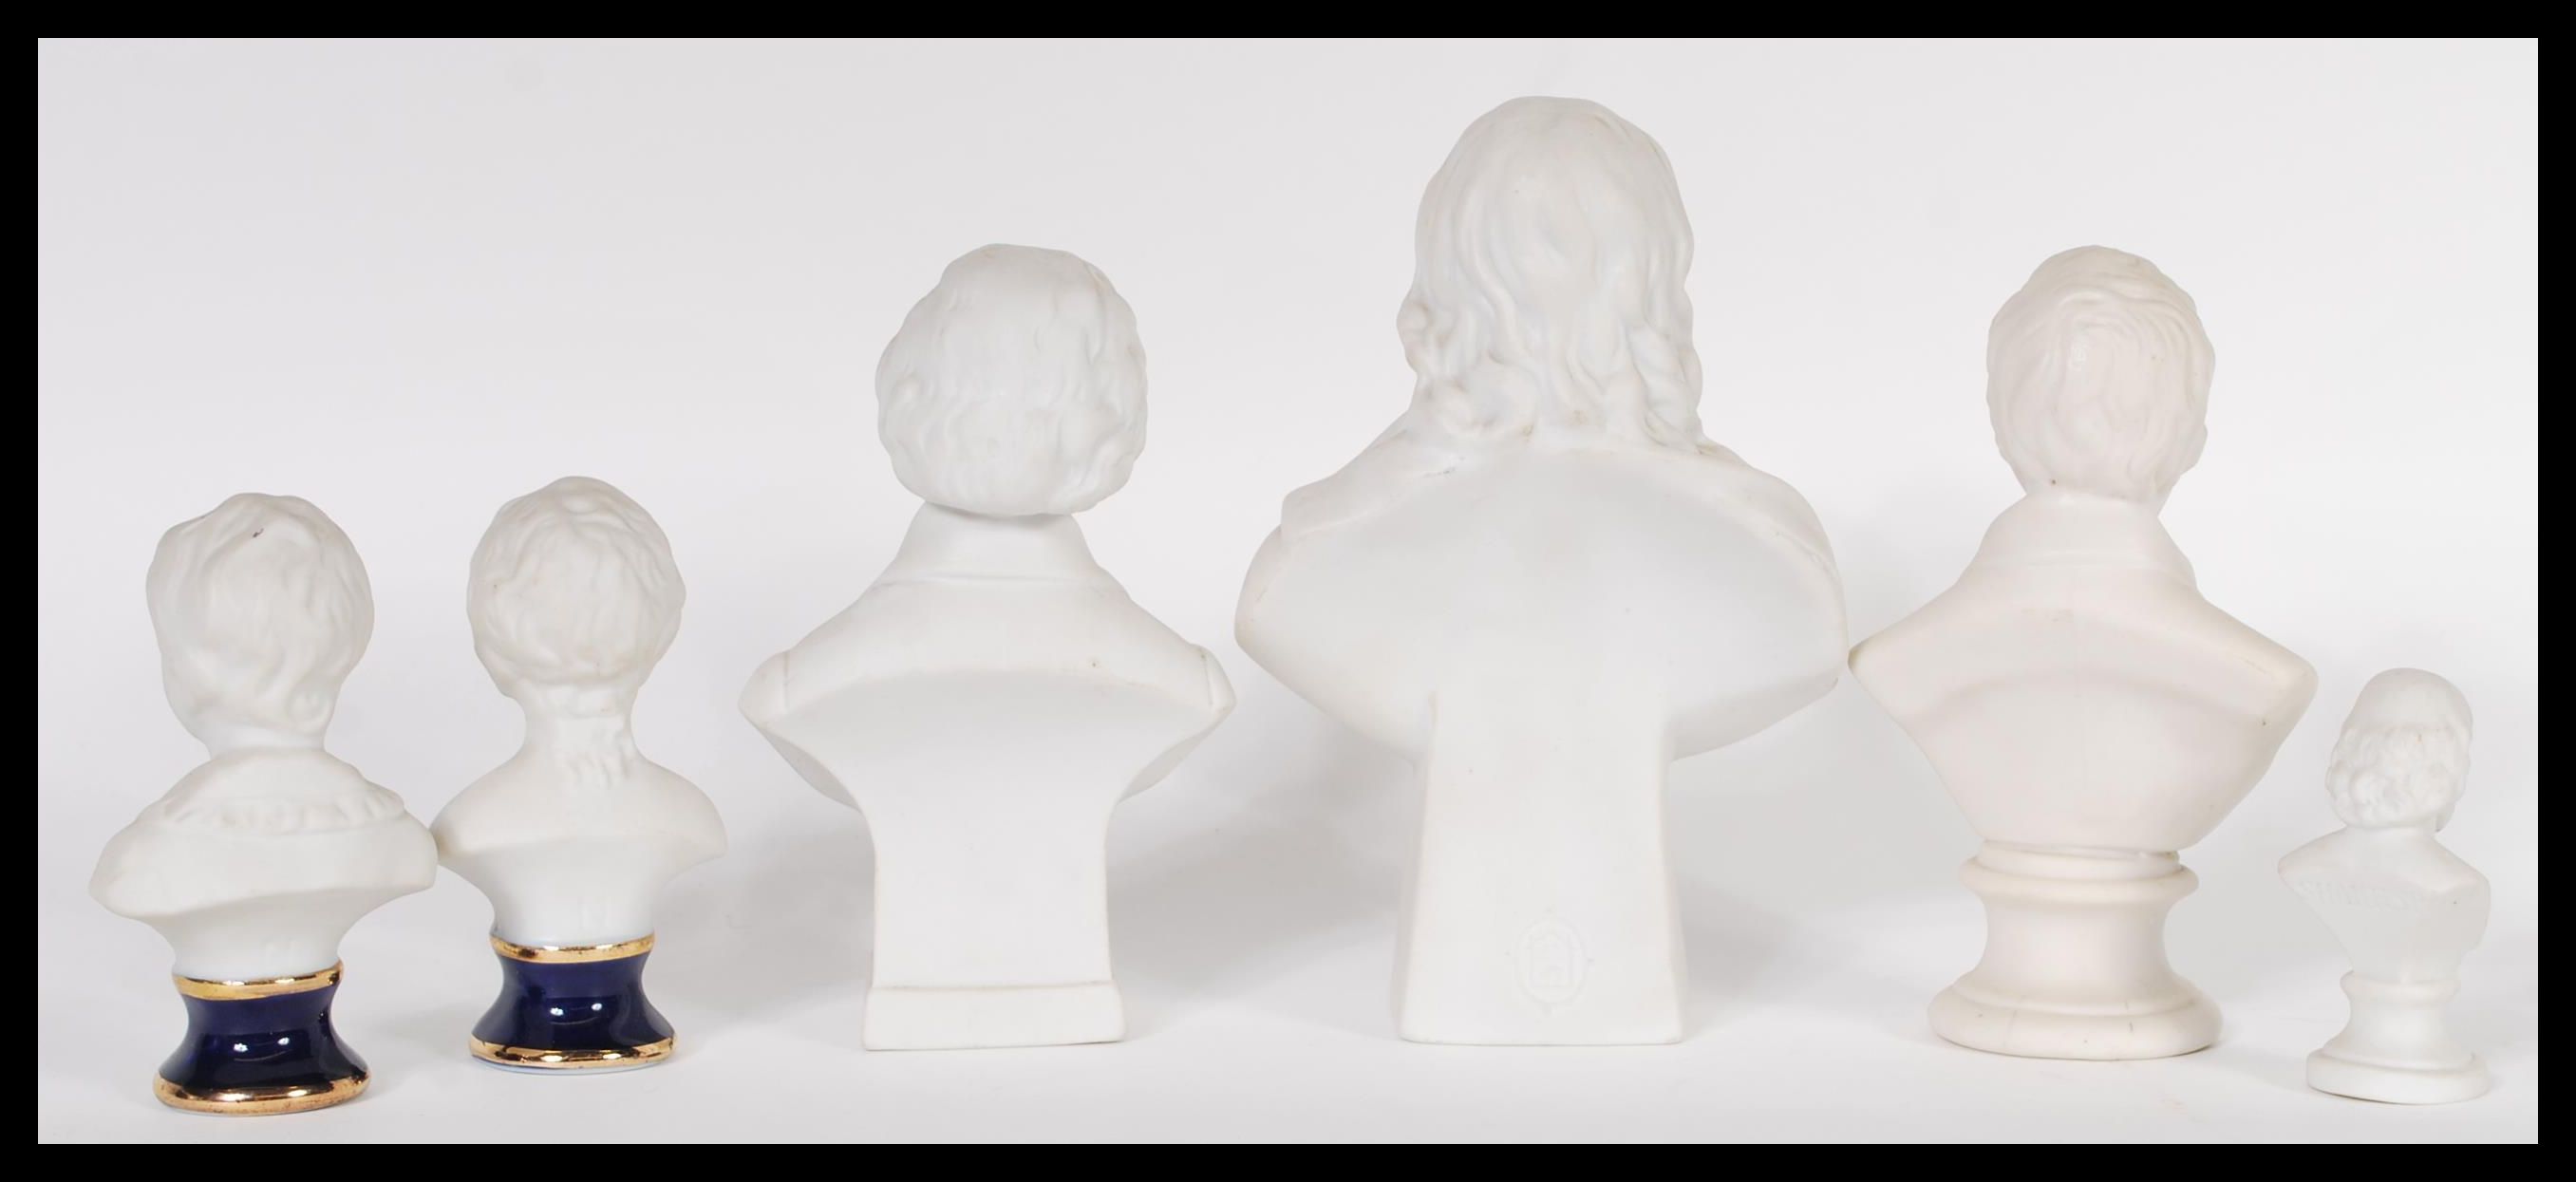 A set of six biscuit porcelain parian ware bisque ceramic busts dating from the 19th Century to - Image 7 of 11